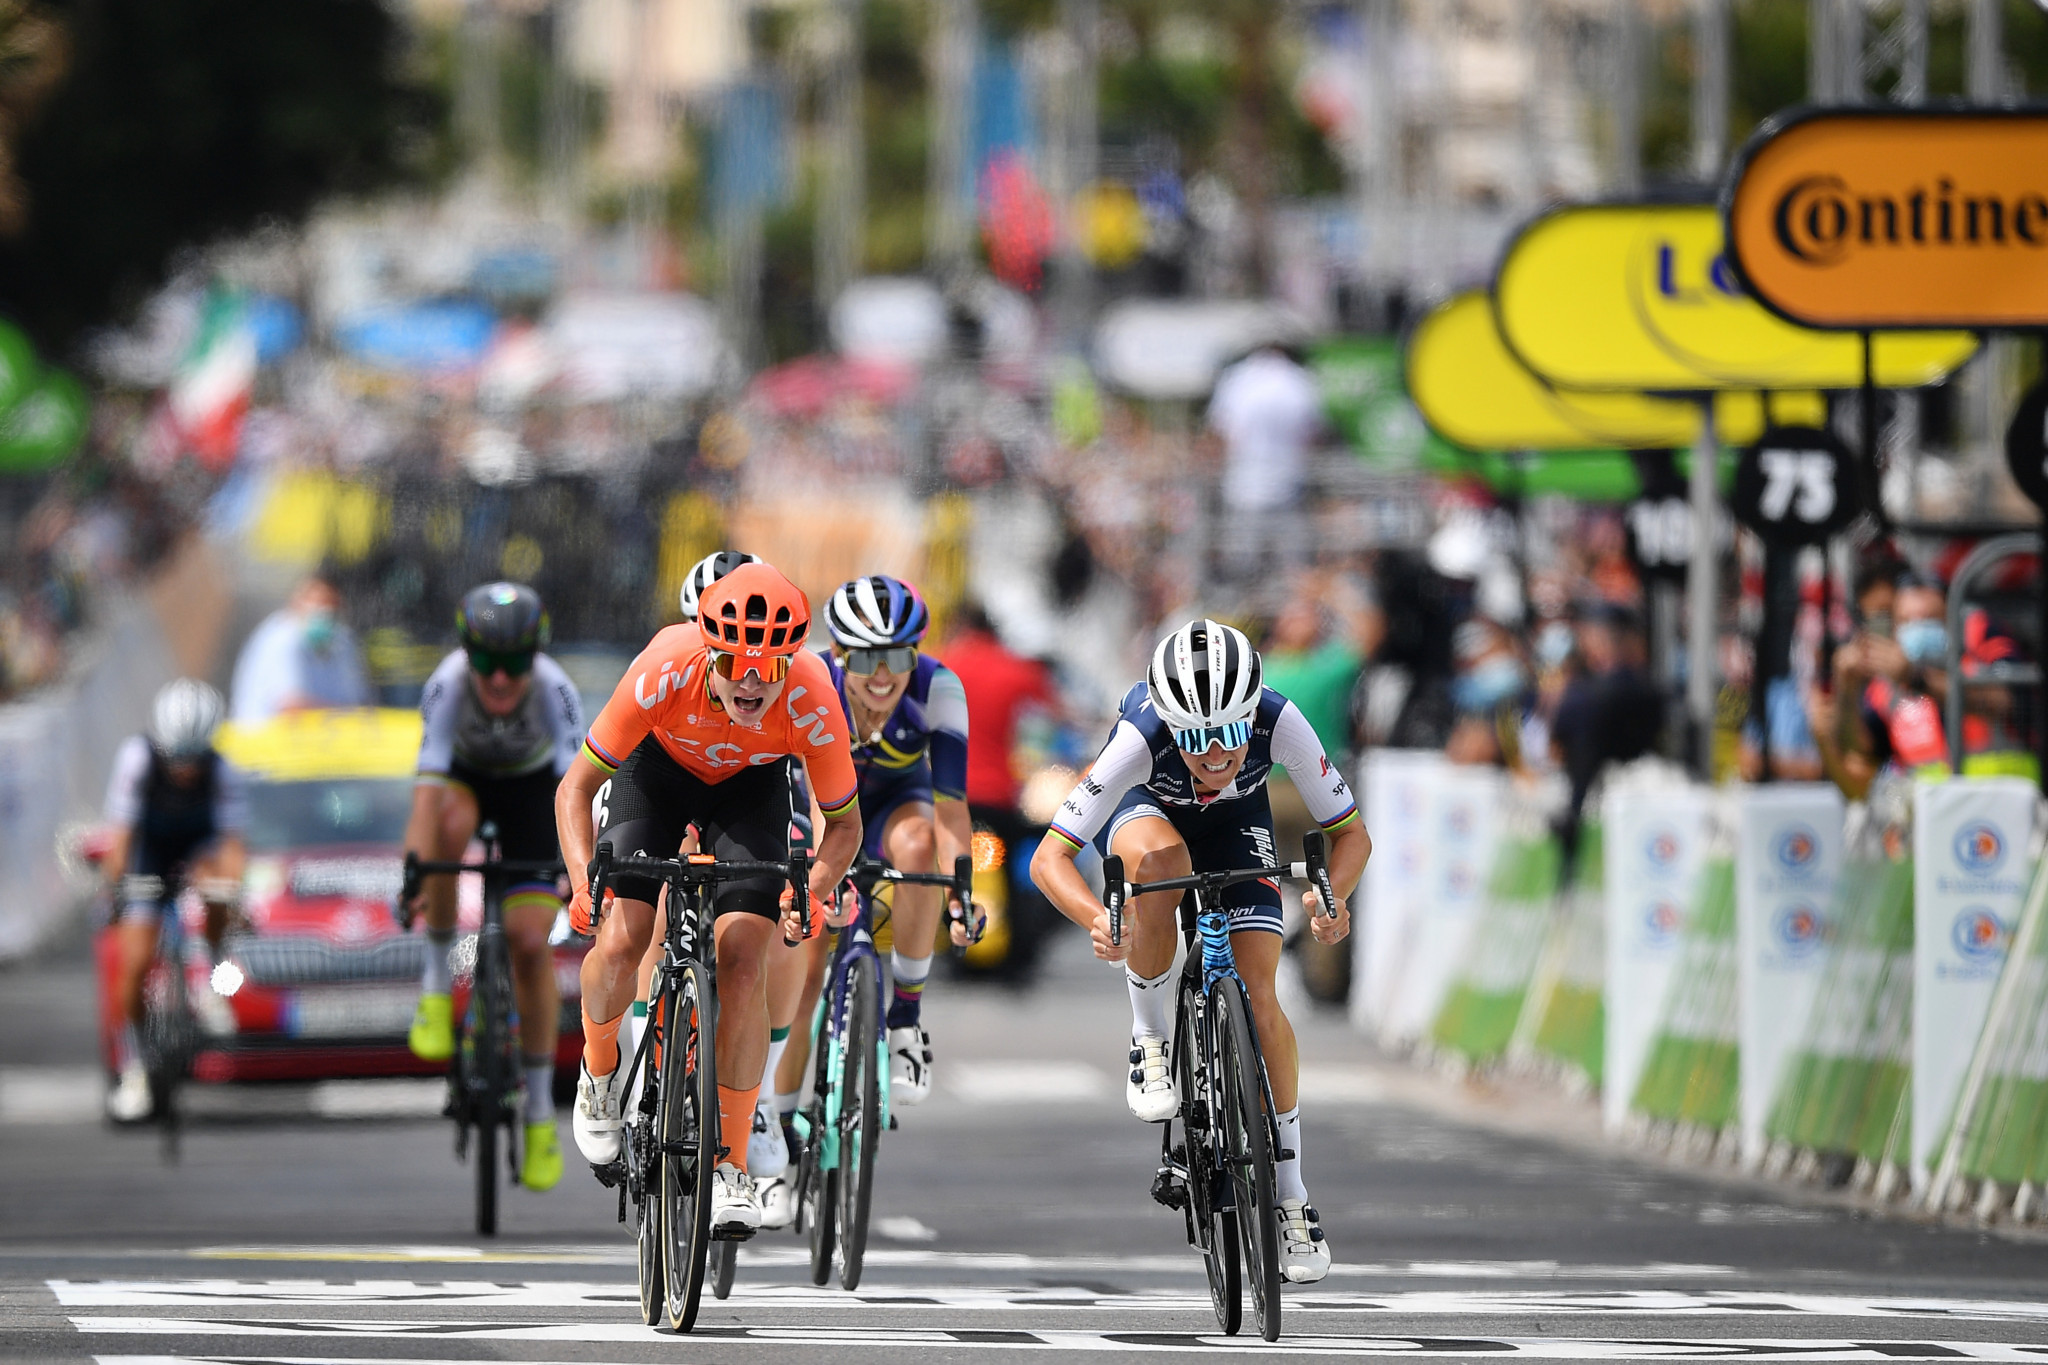 An eight-day women's Tour de France will launch in 2022 ©Getty Images